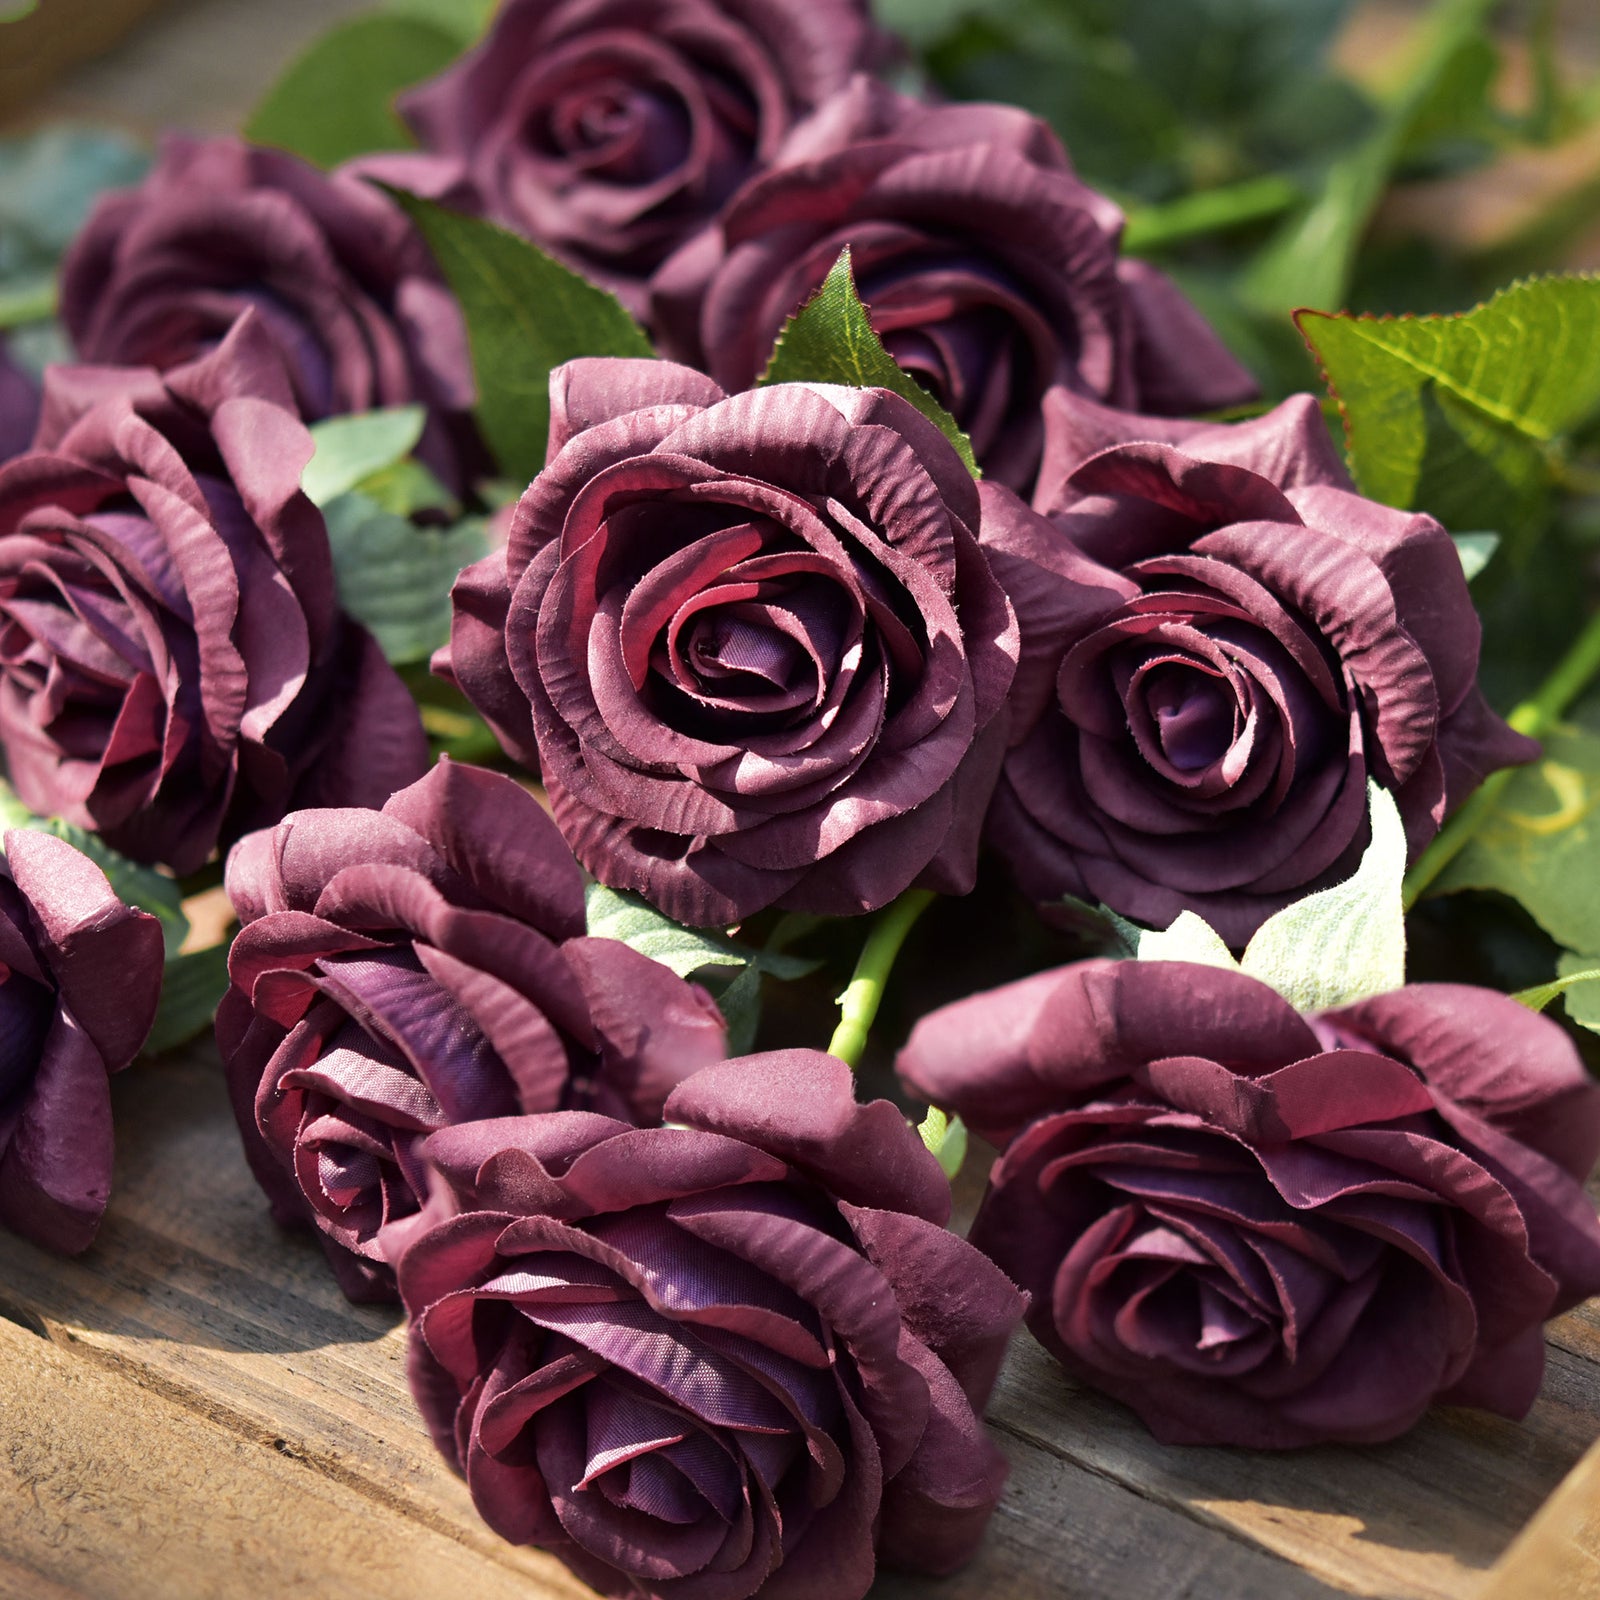 Real Touch 10 Stems Burgundy Silk Artificial Roses Flowers ‘Petals Feel and Look like Fresh Roses'